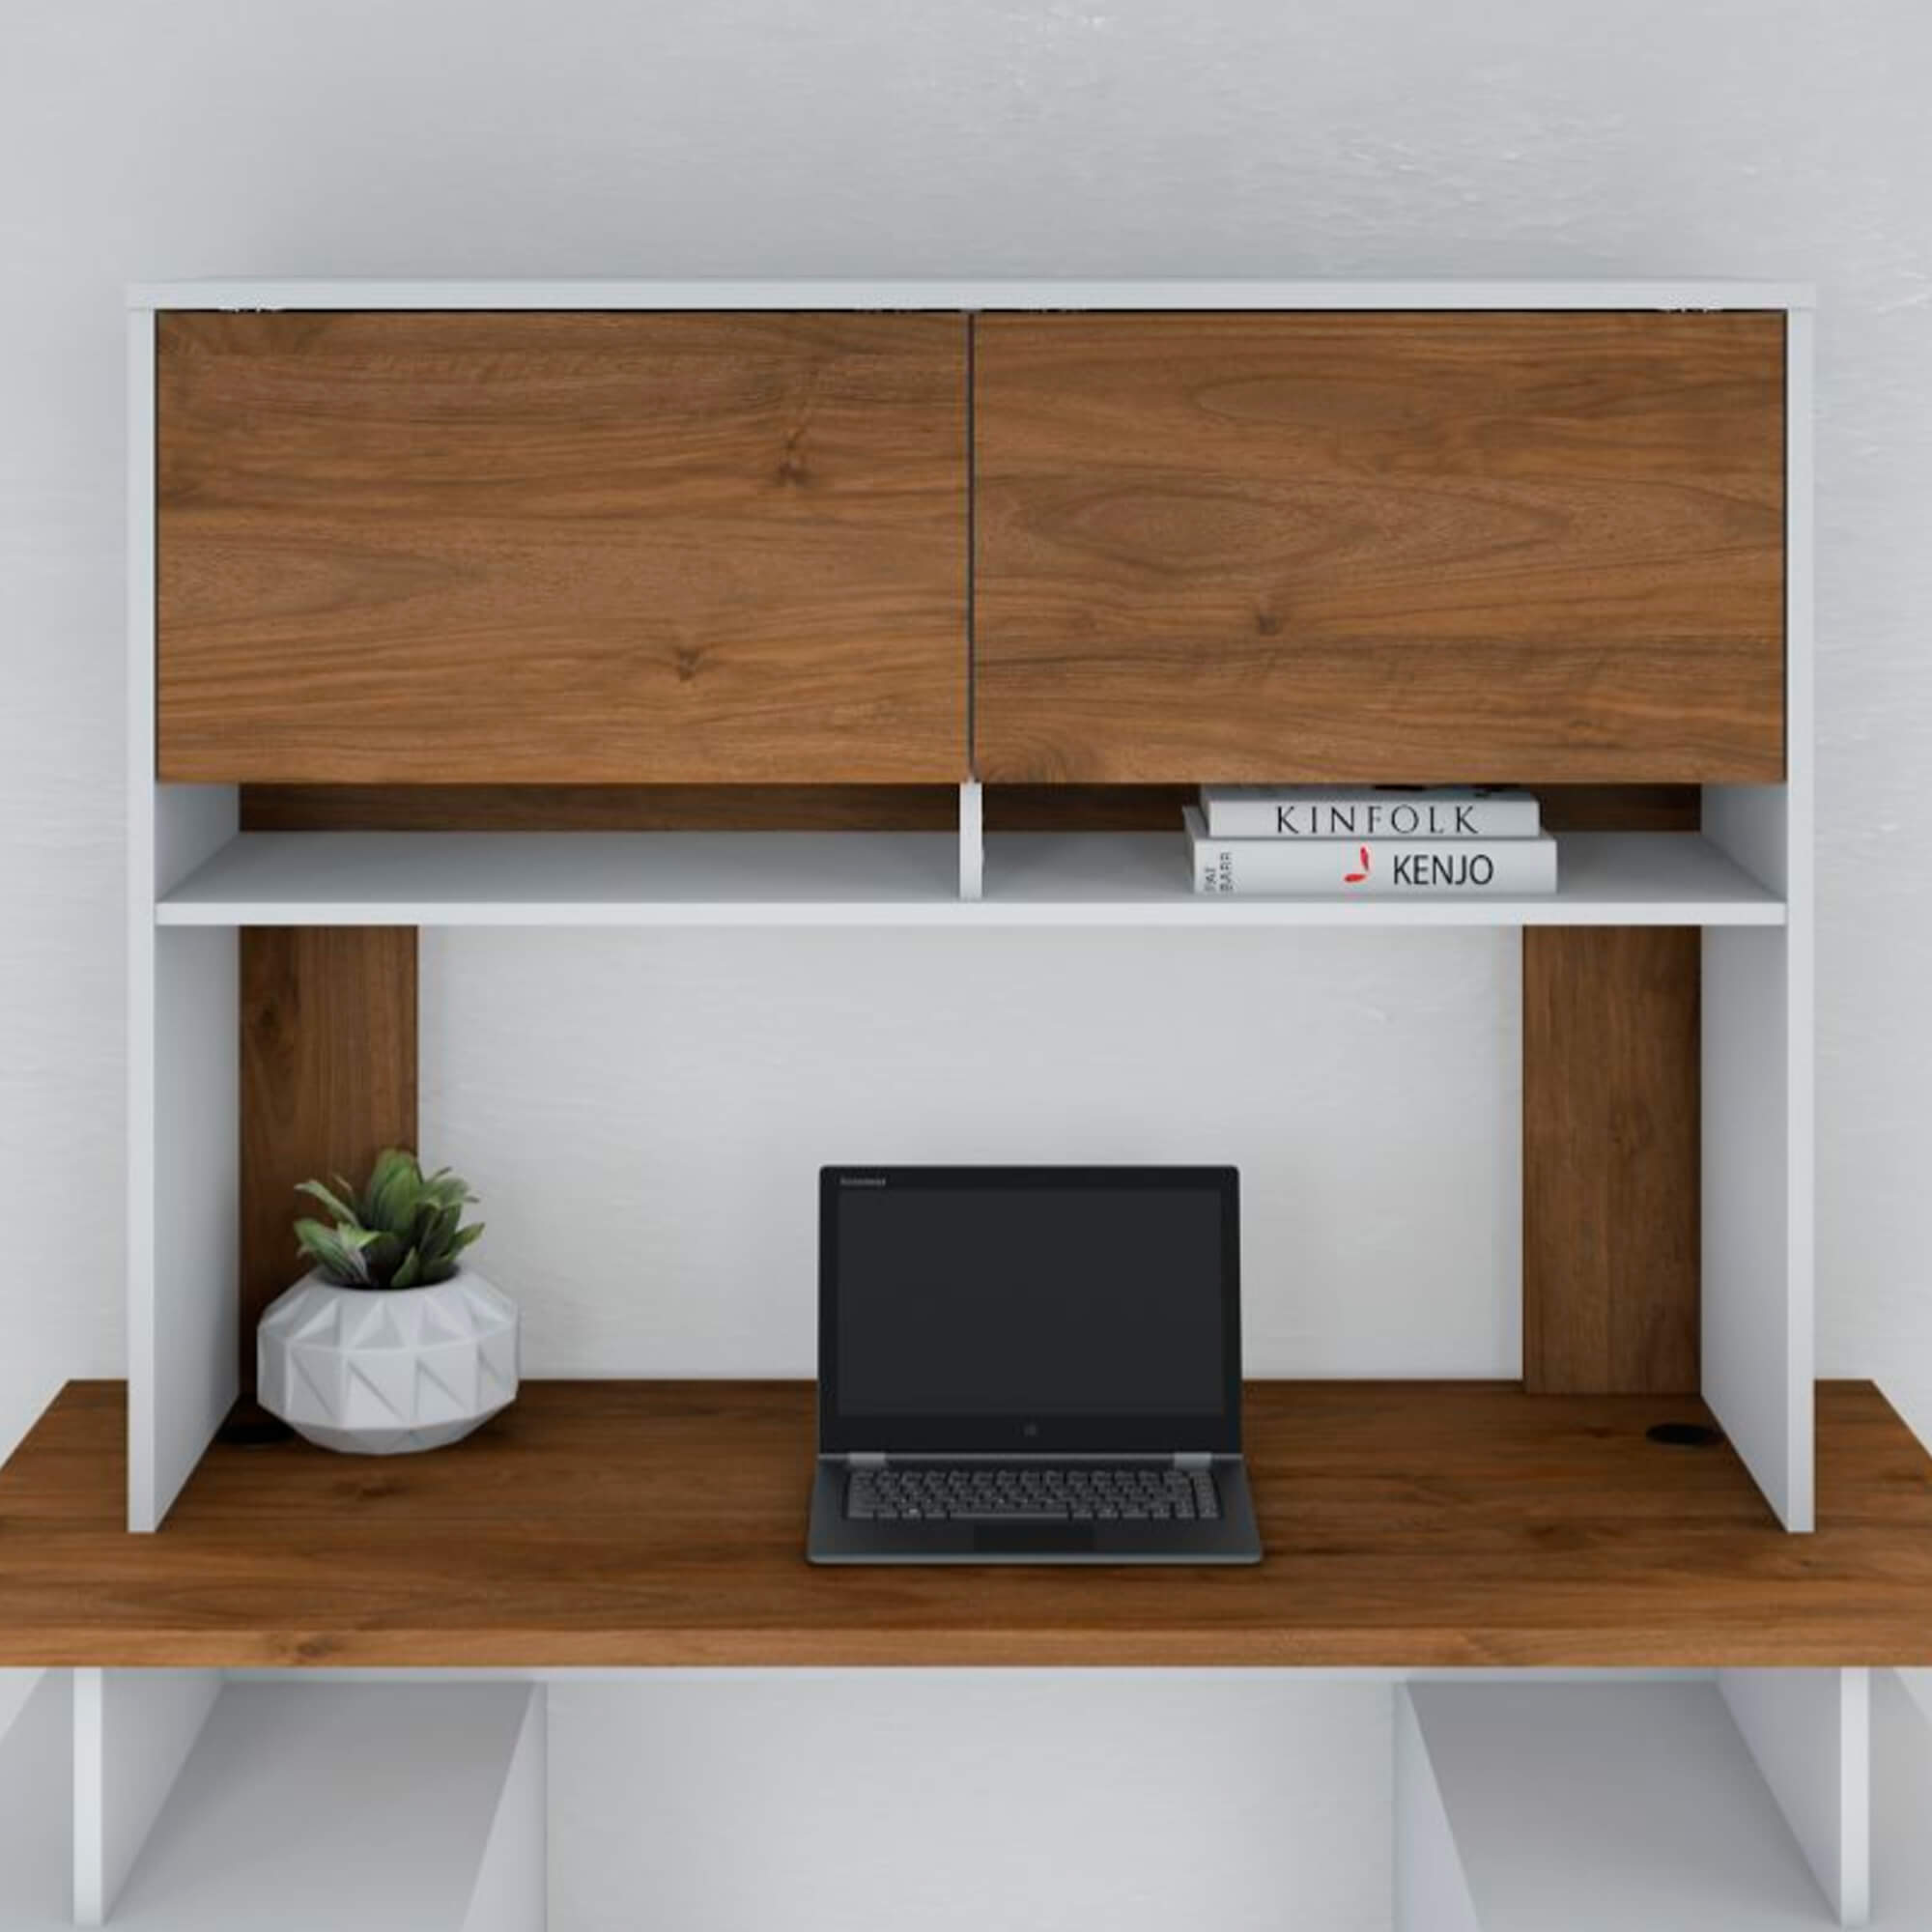 H2 home office storage hutch overview 1 2 3 4